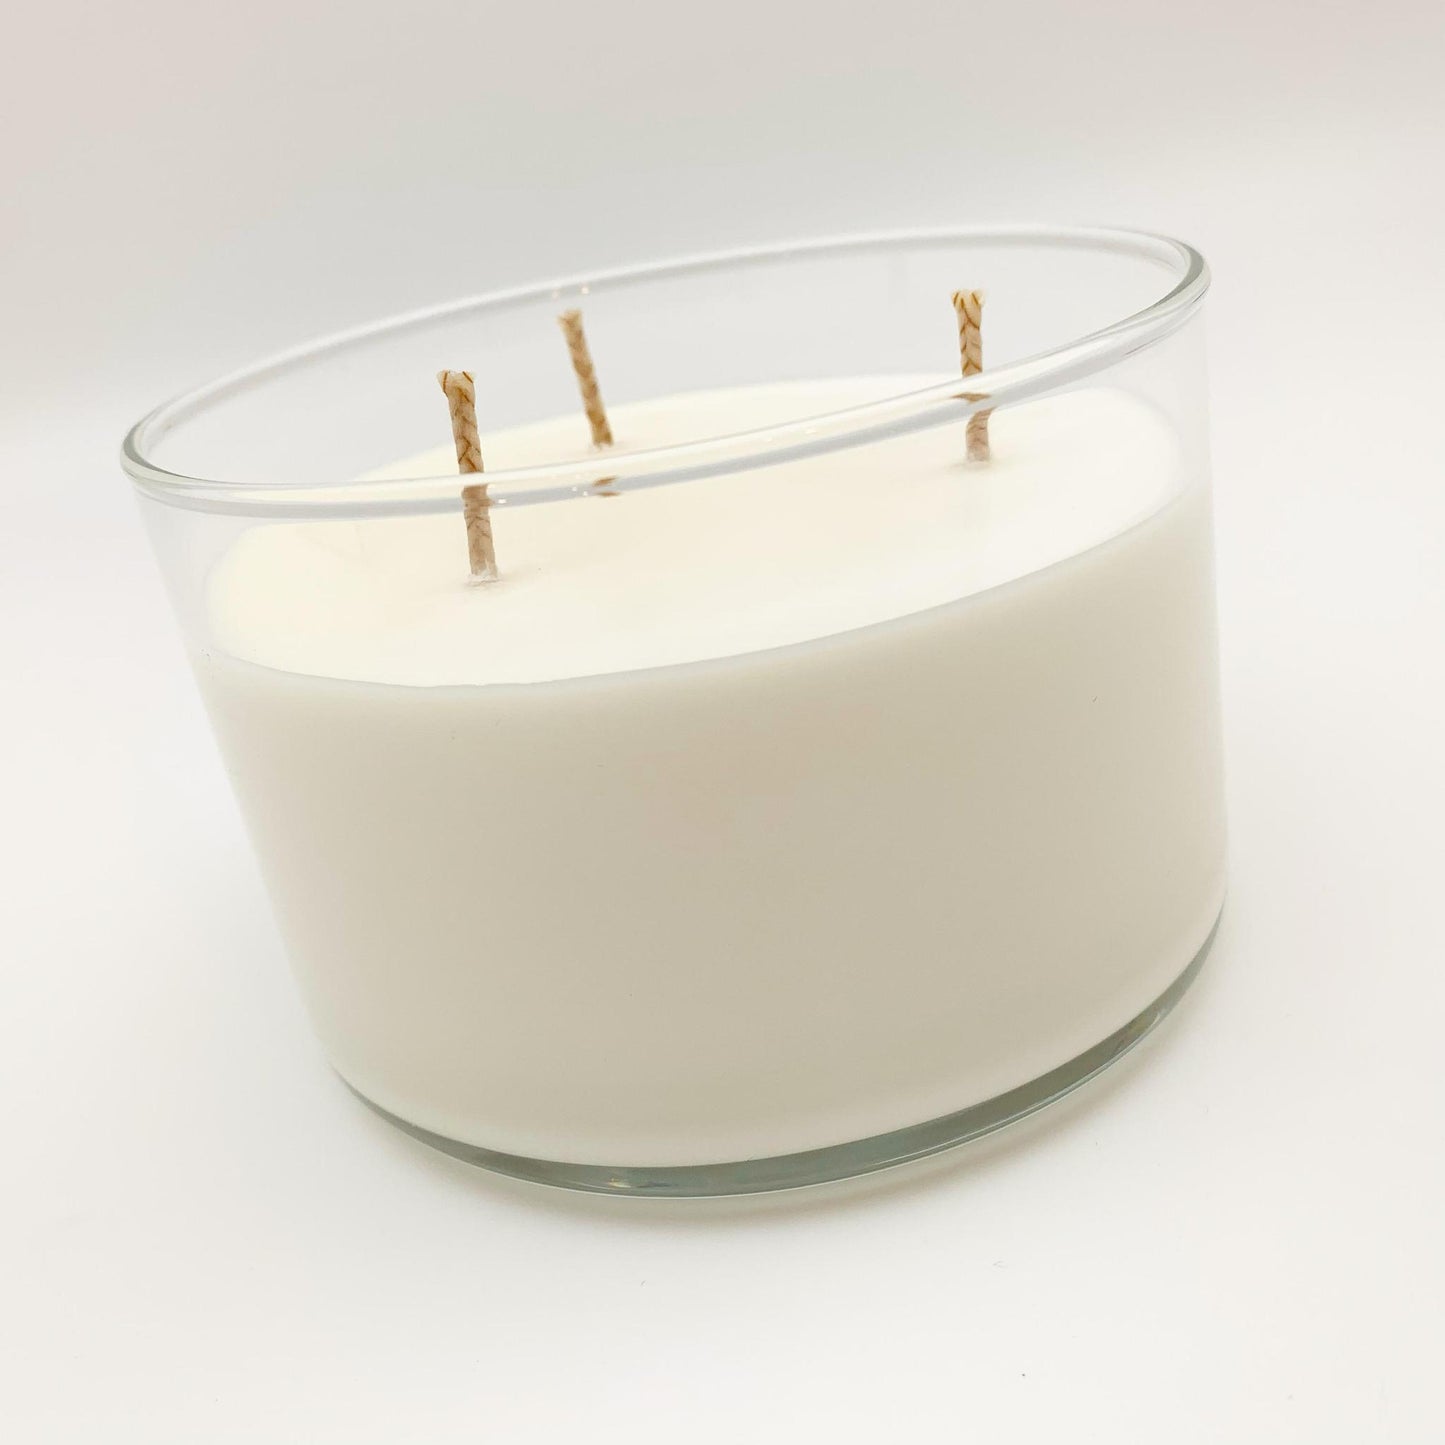 Candle - Sicilian Fig - 3 Wick